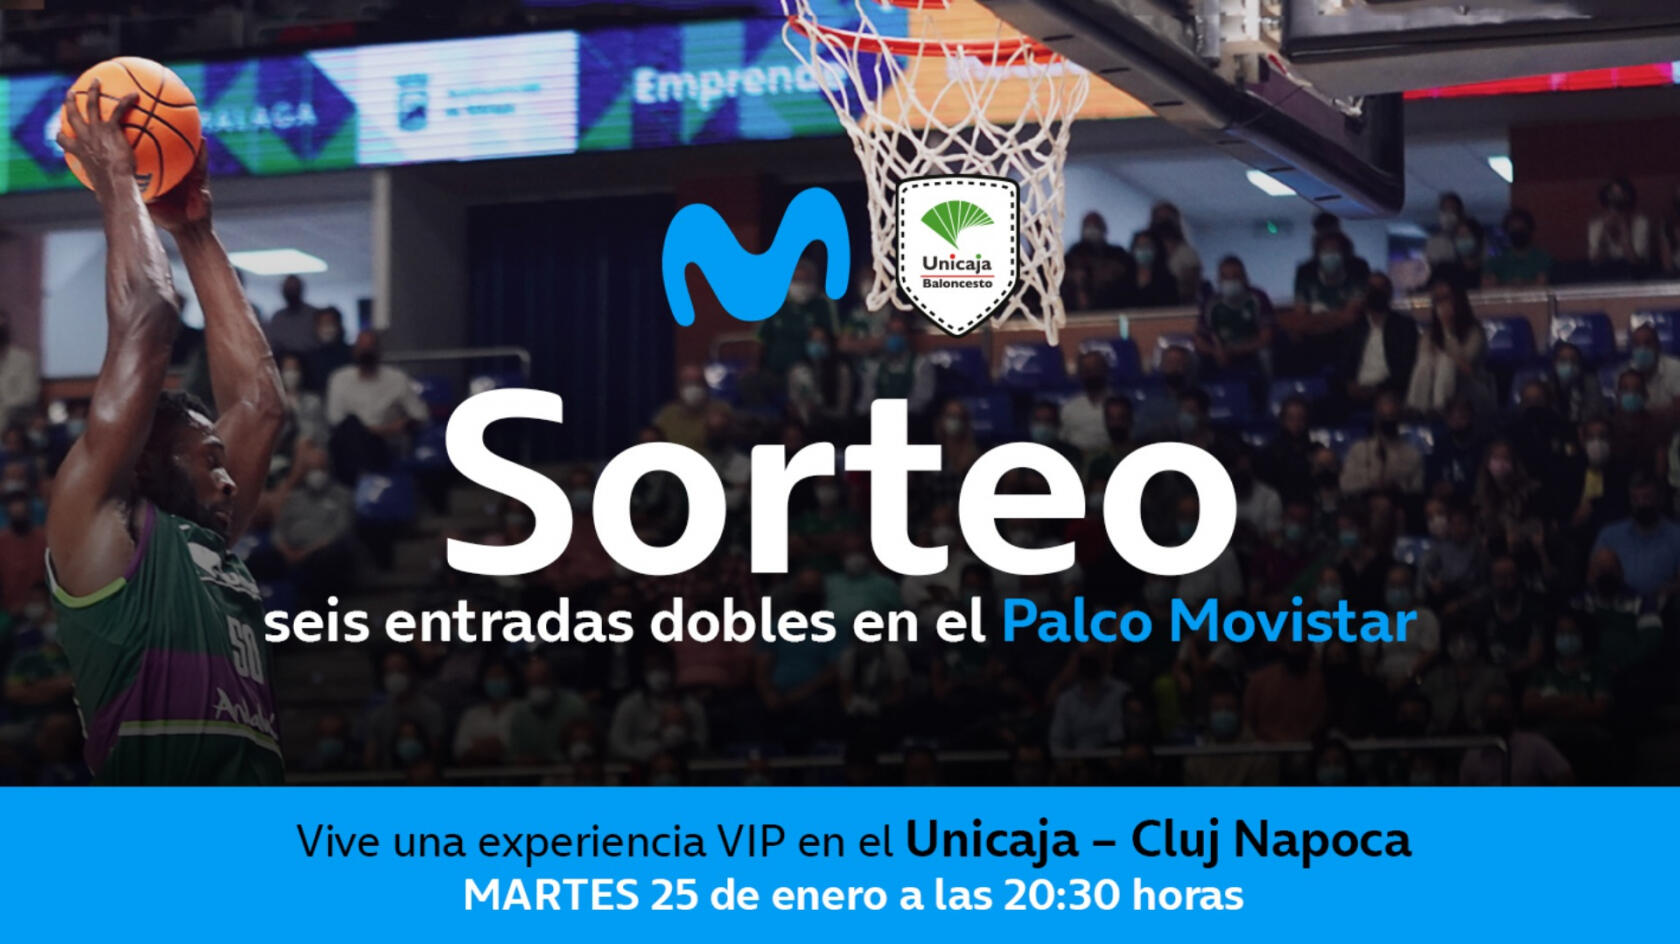 Unicaja Baloncesto and Movistar raffle 6 double tickets in the Movistar Box for this Tuesday 25